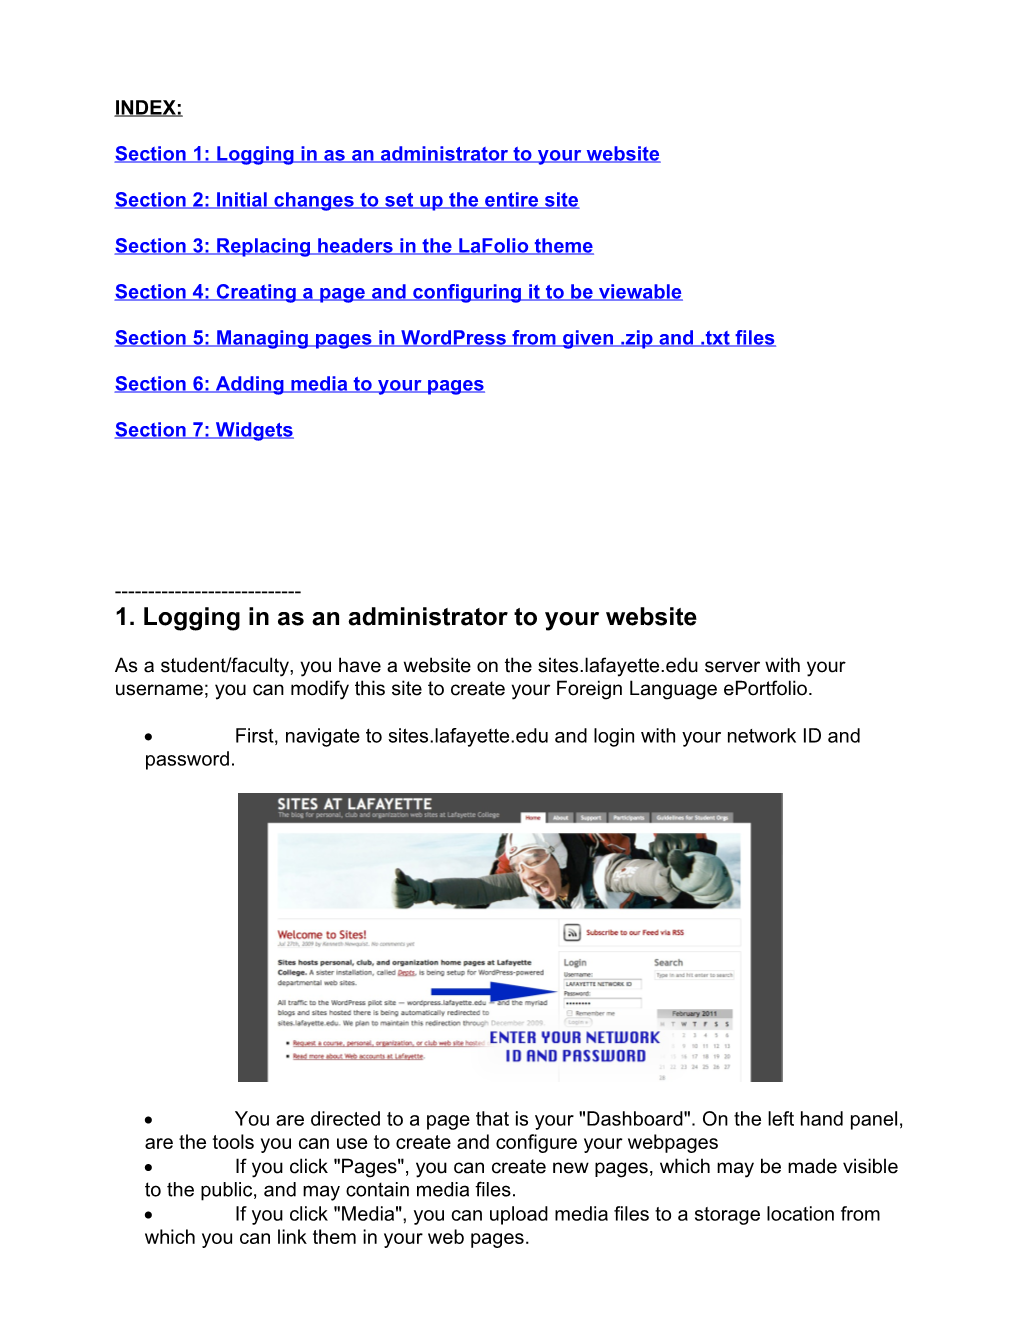 Section 1: Logging in As an Administrator to Your Website